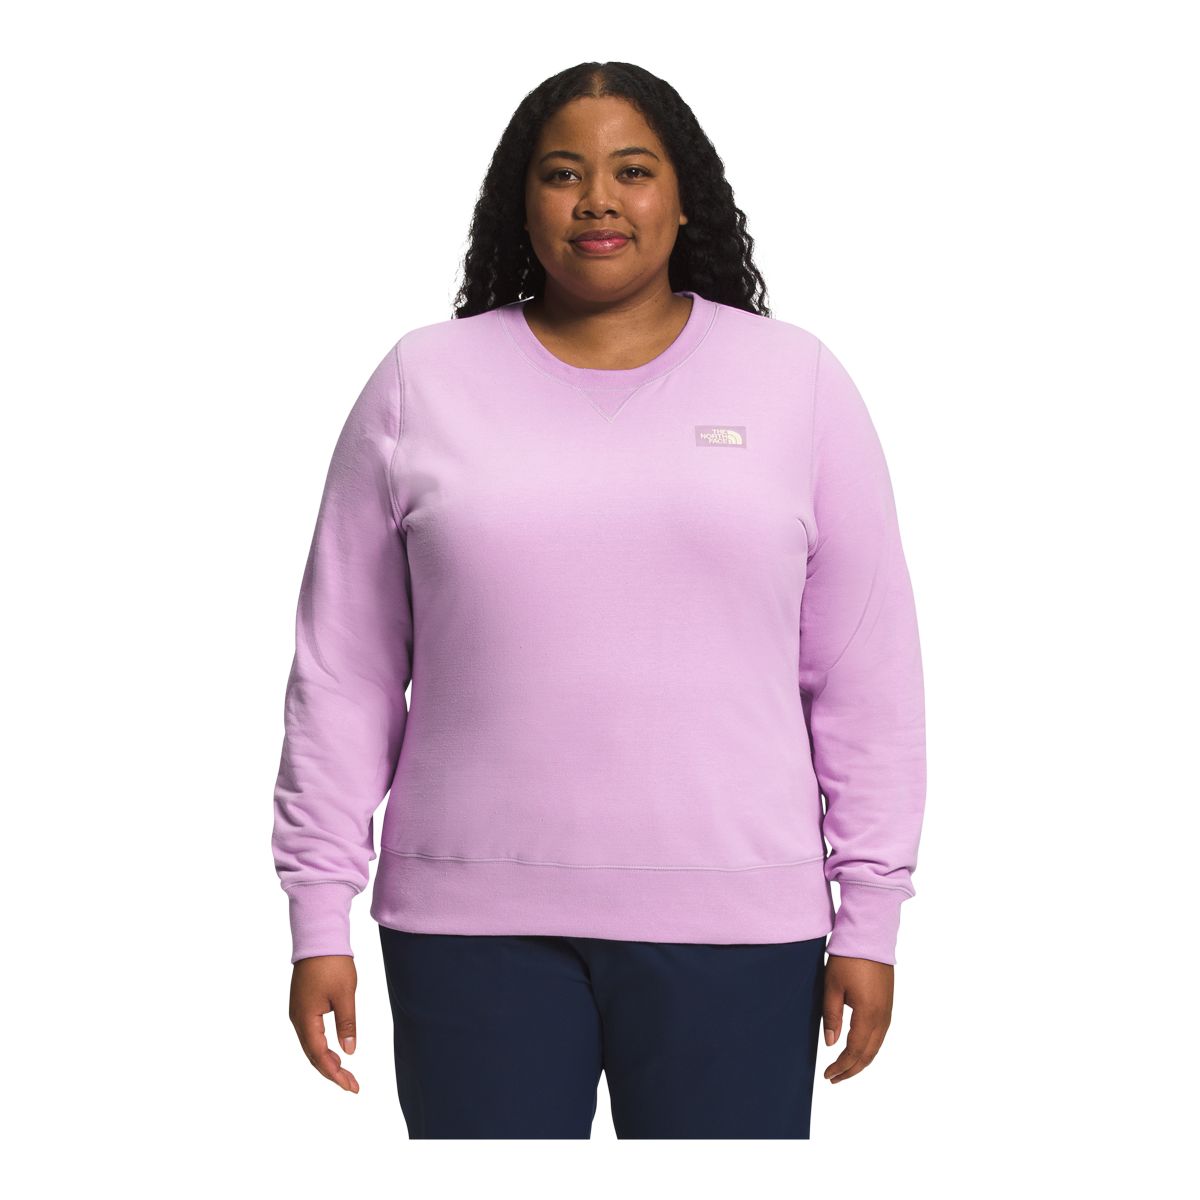 The North Face Women's Plus Size Heritage Patch Sweatshirt